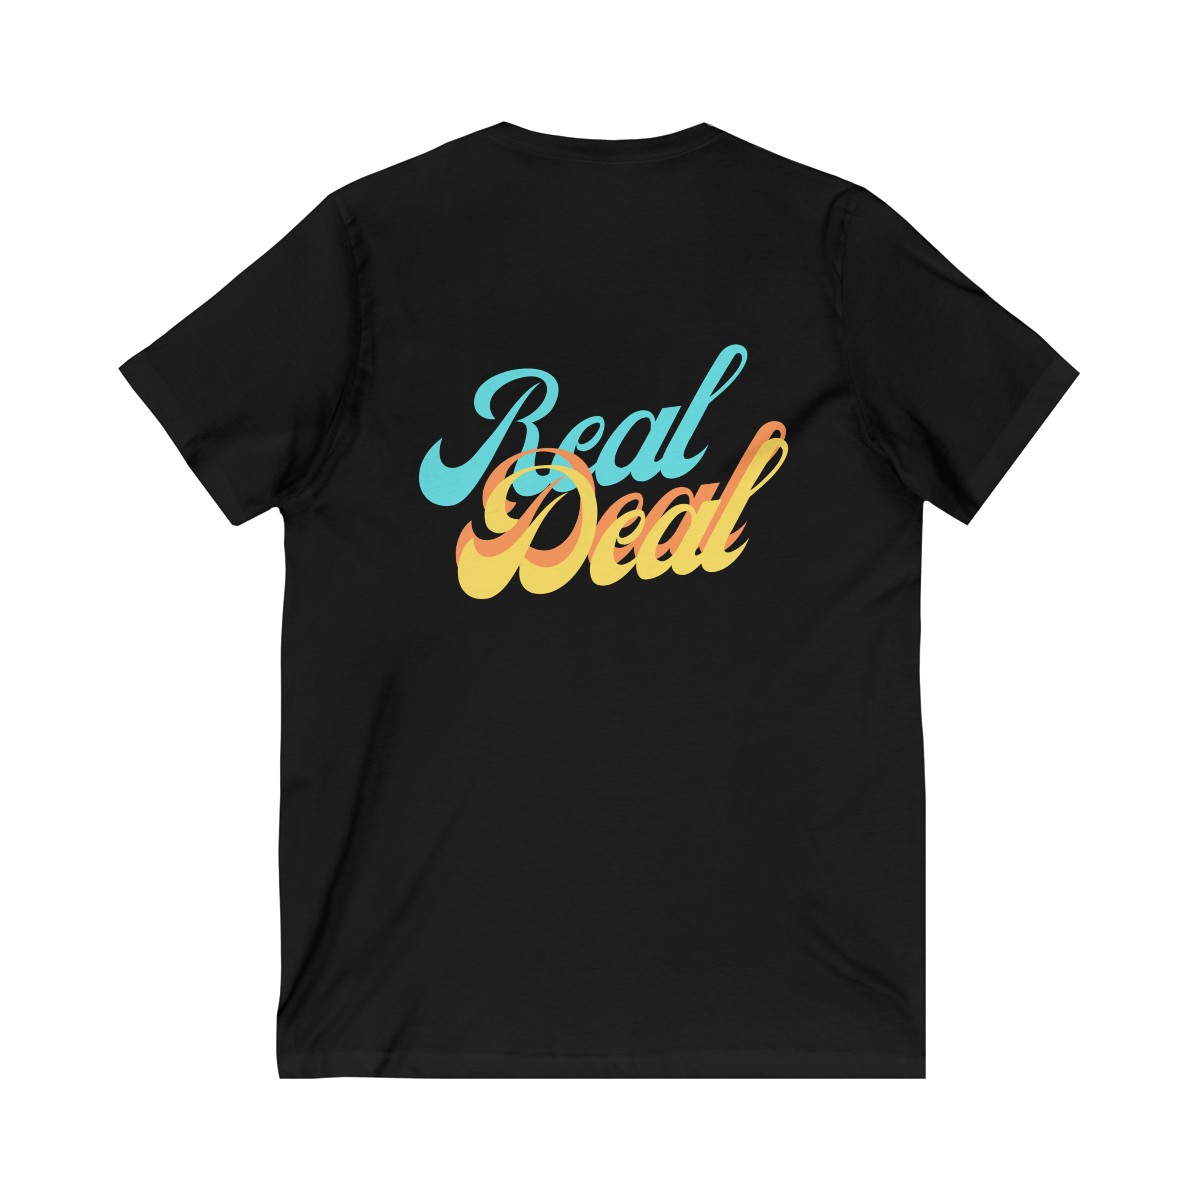 VP authentic Brand Tee product thumbnail image